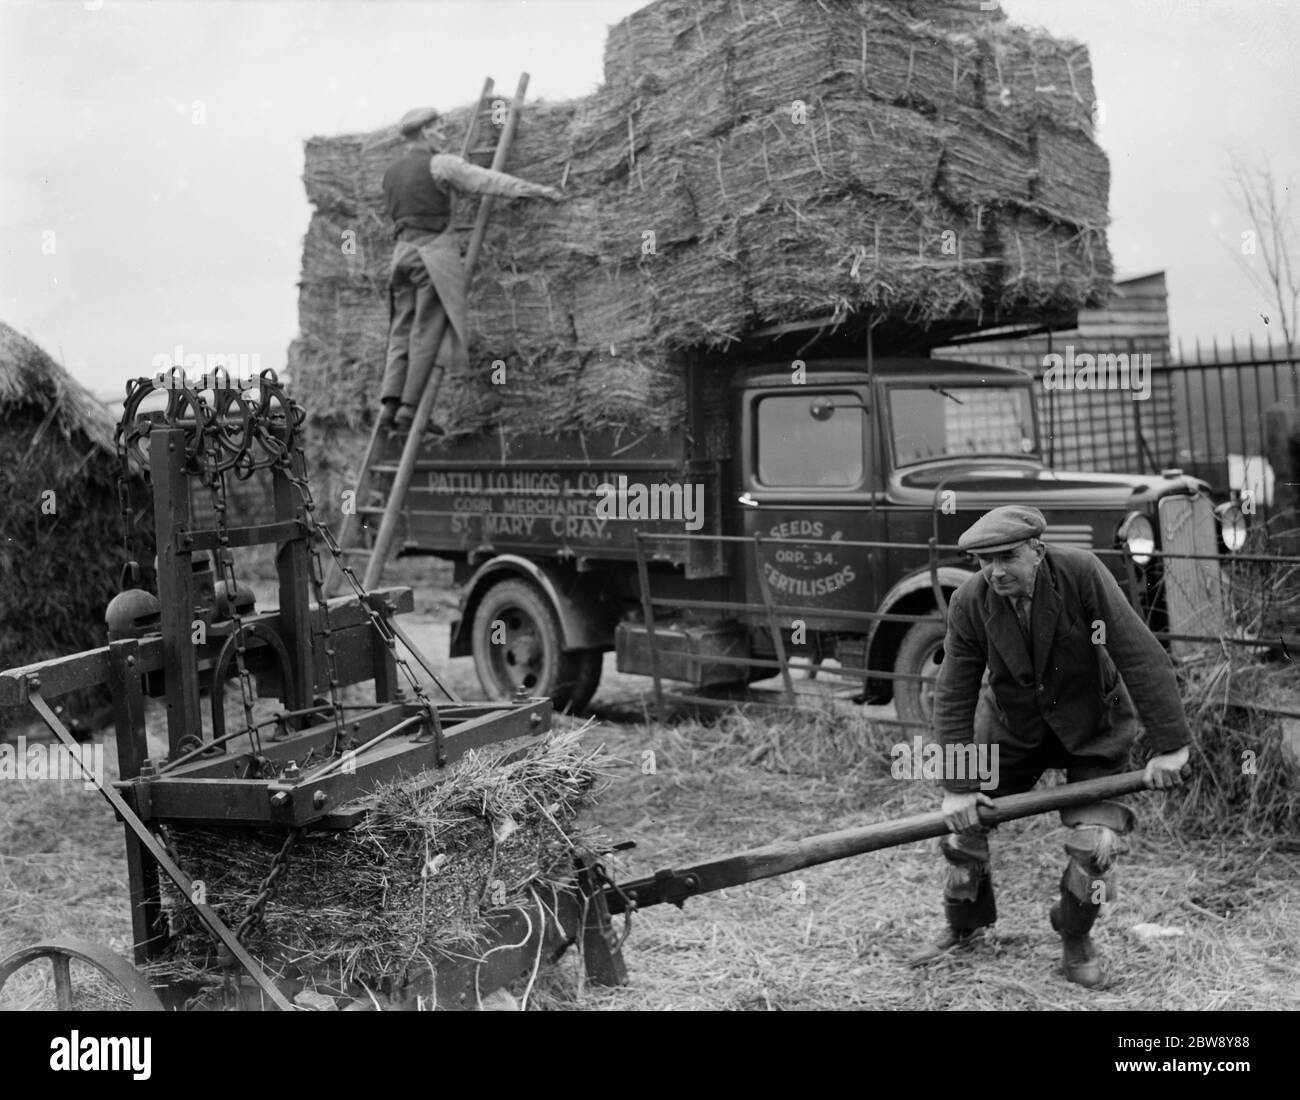 Pattullo Higgs and Co Ltd workers use a press to make hay bales . They then load them onto their company Bedford truck in St Mary Cray , Kent . 21 February 1936 . Stock Photo